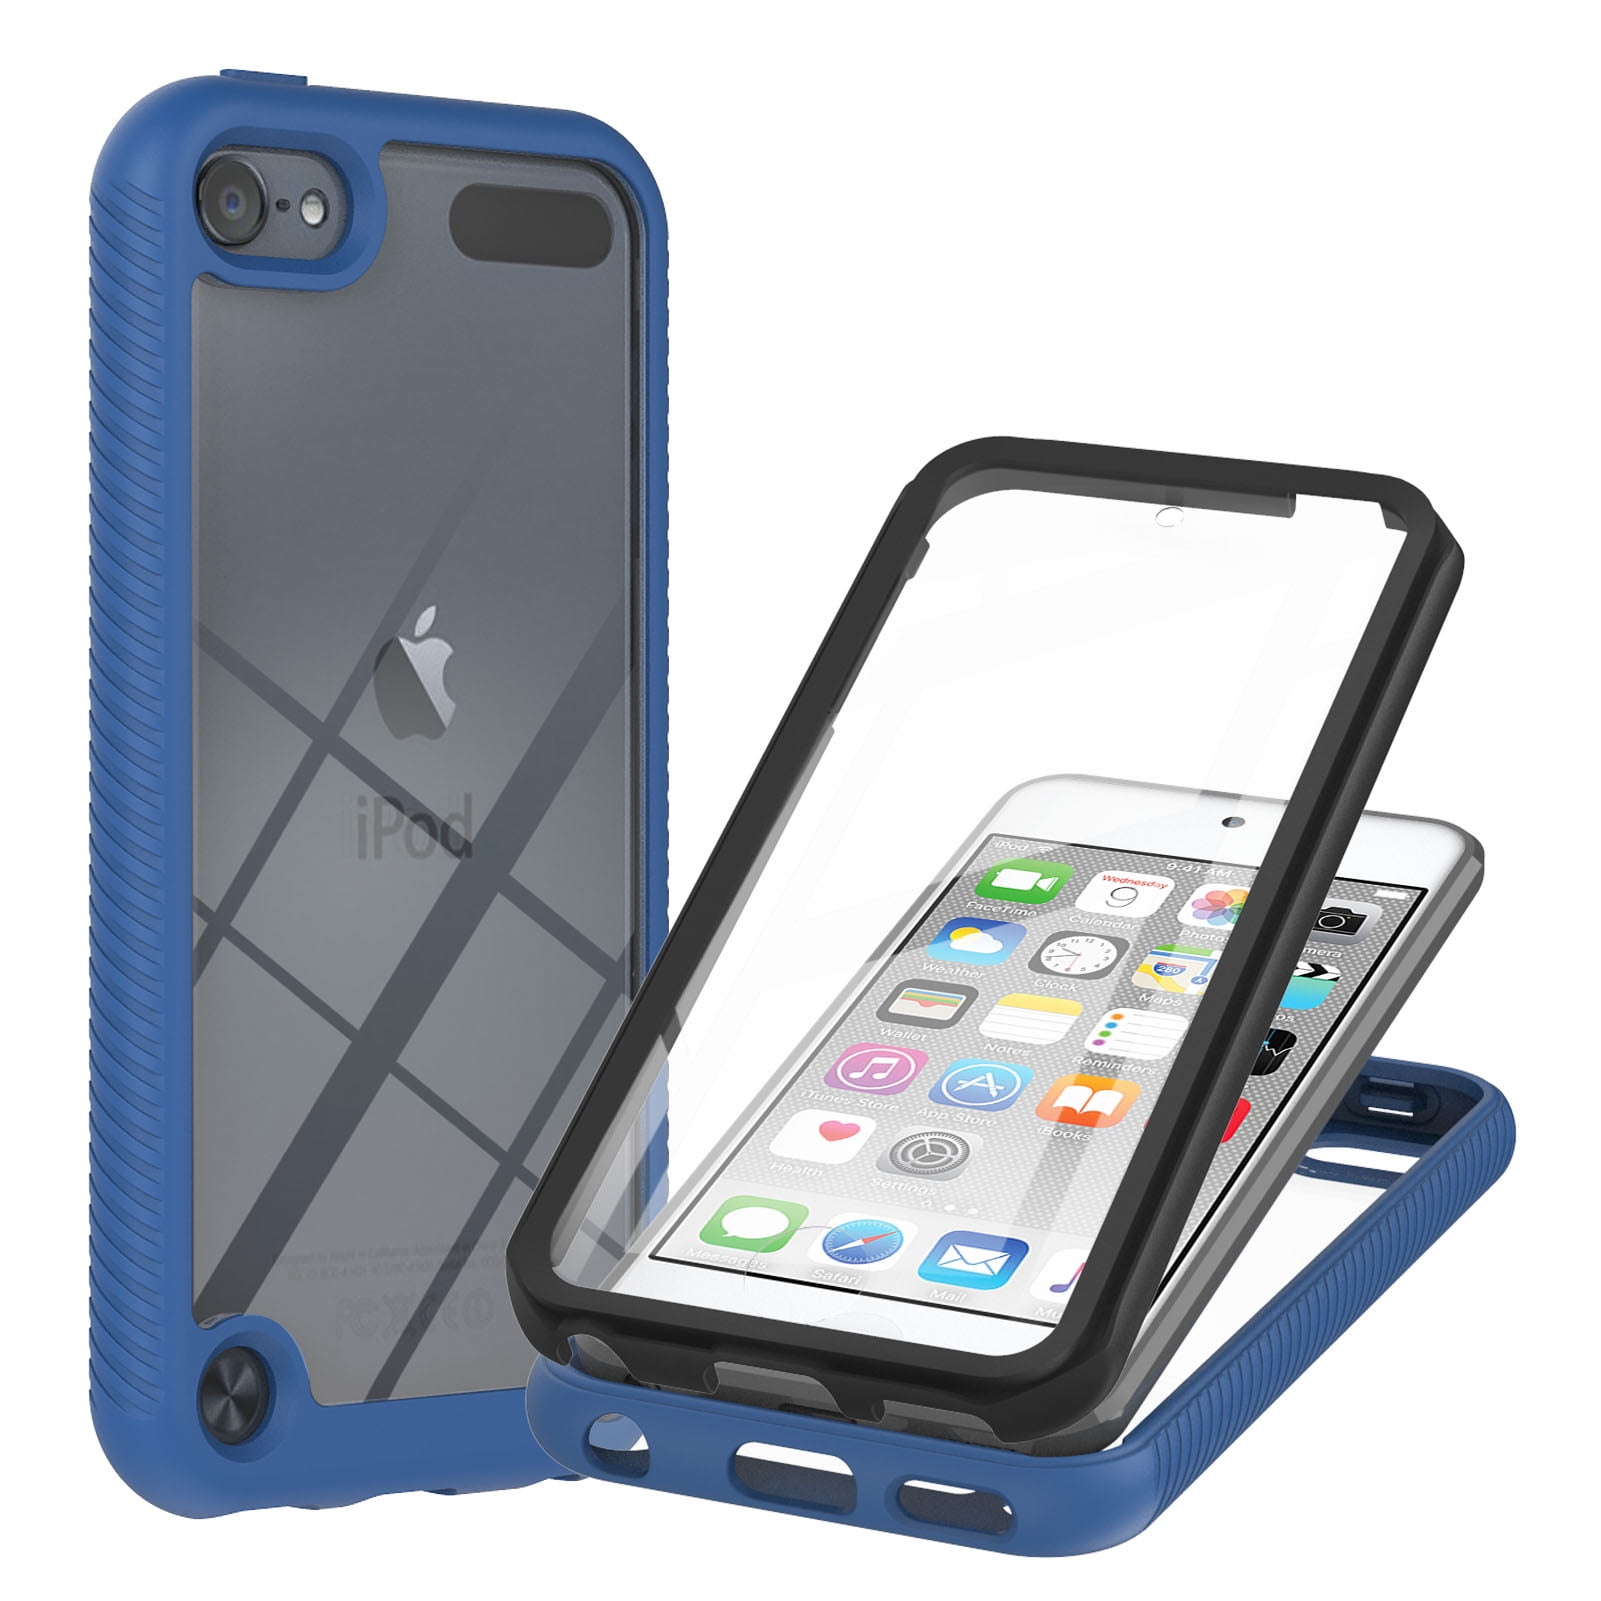 Waterproof Shockproof Cover 5th 6th Generation 6 Case For Apple iPod Touch 5 